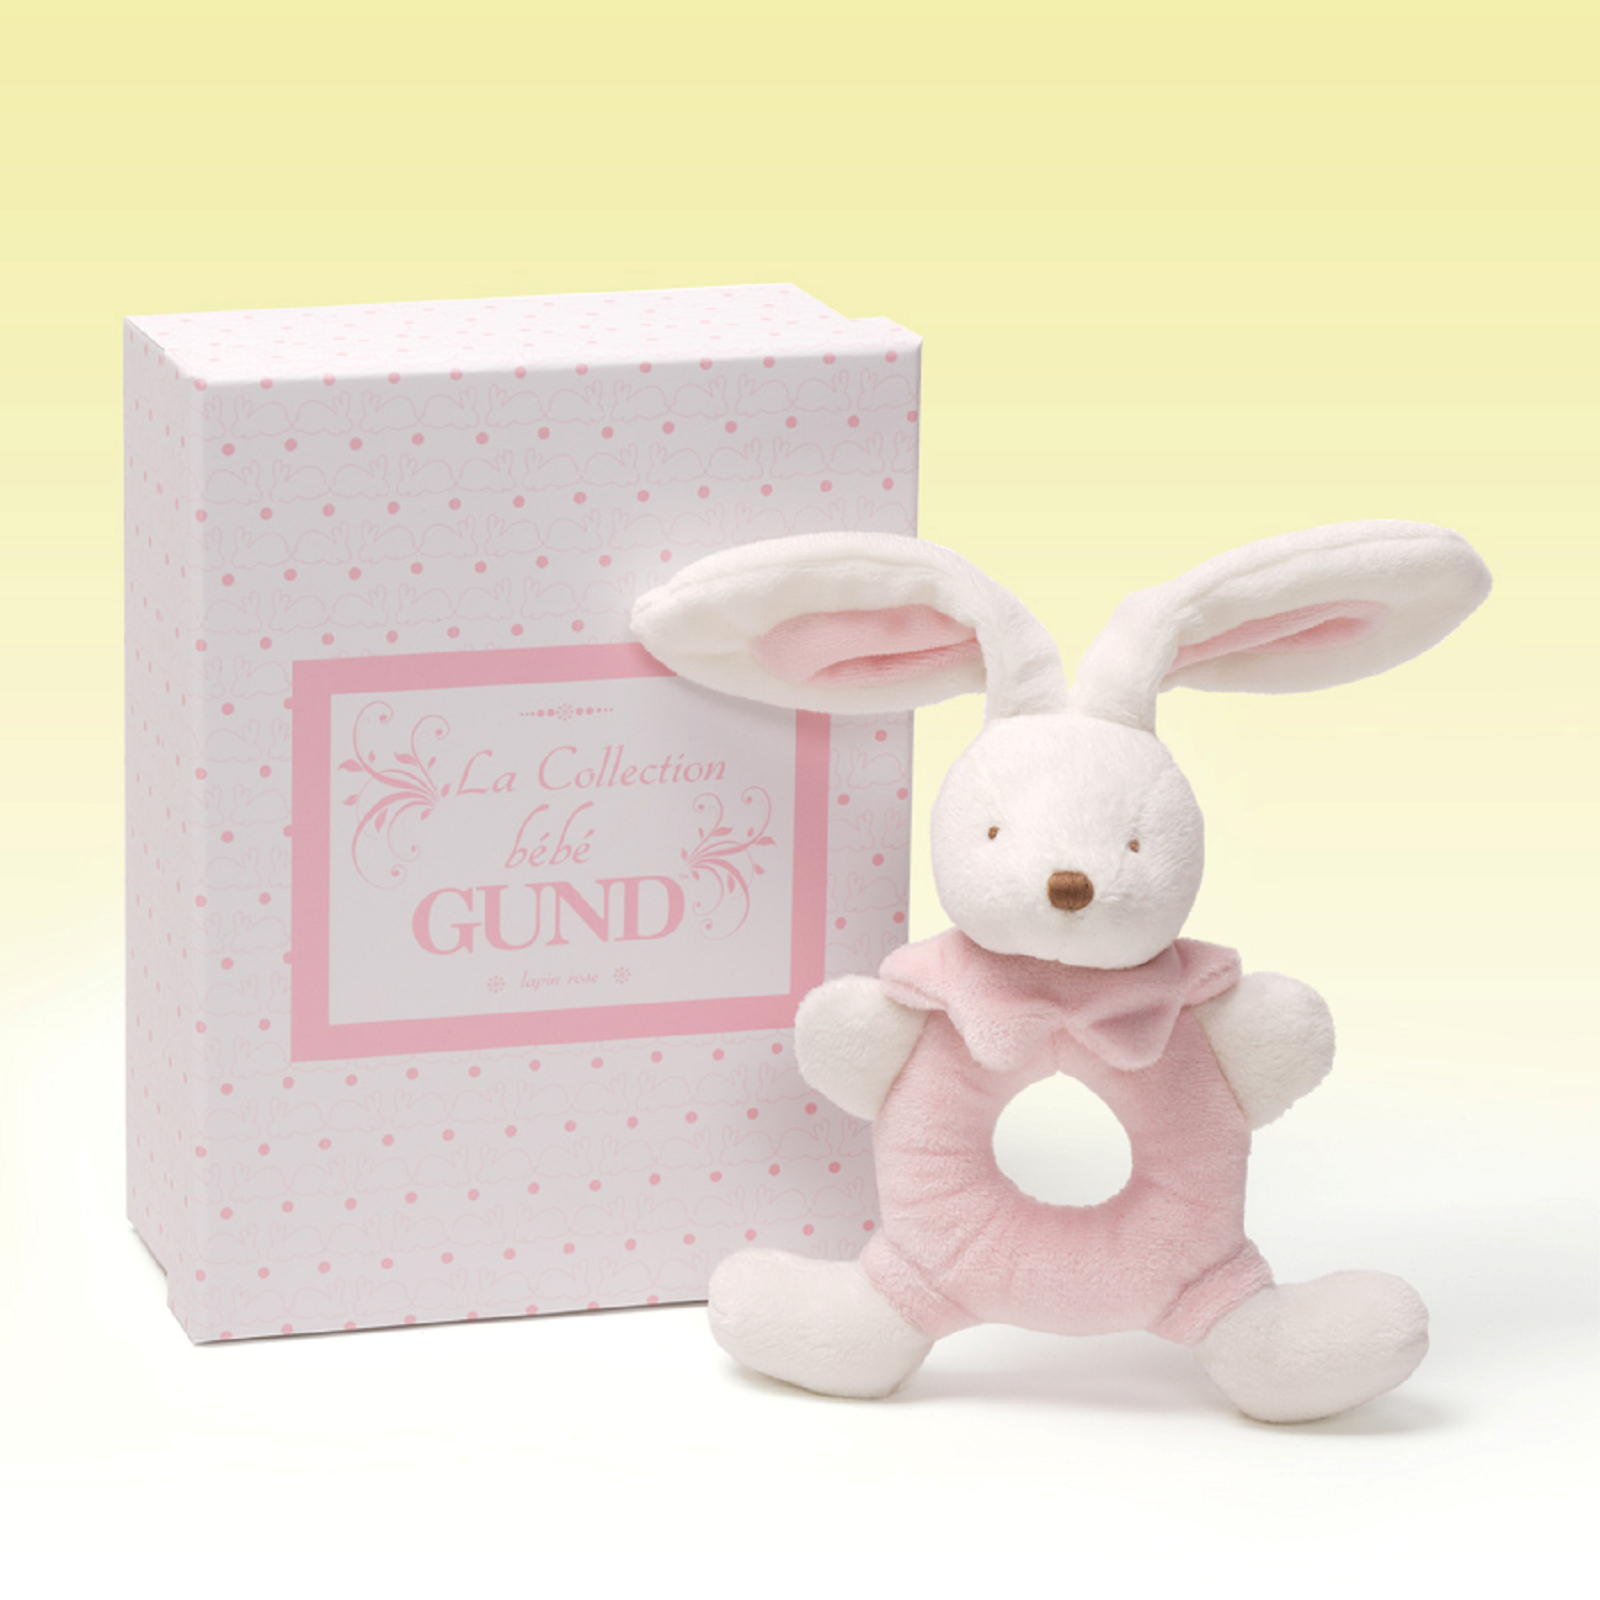 Gund - La Collection be'be' - Pink Bunny Rattle